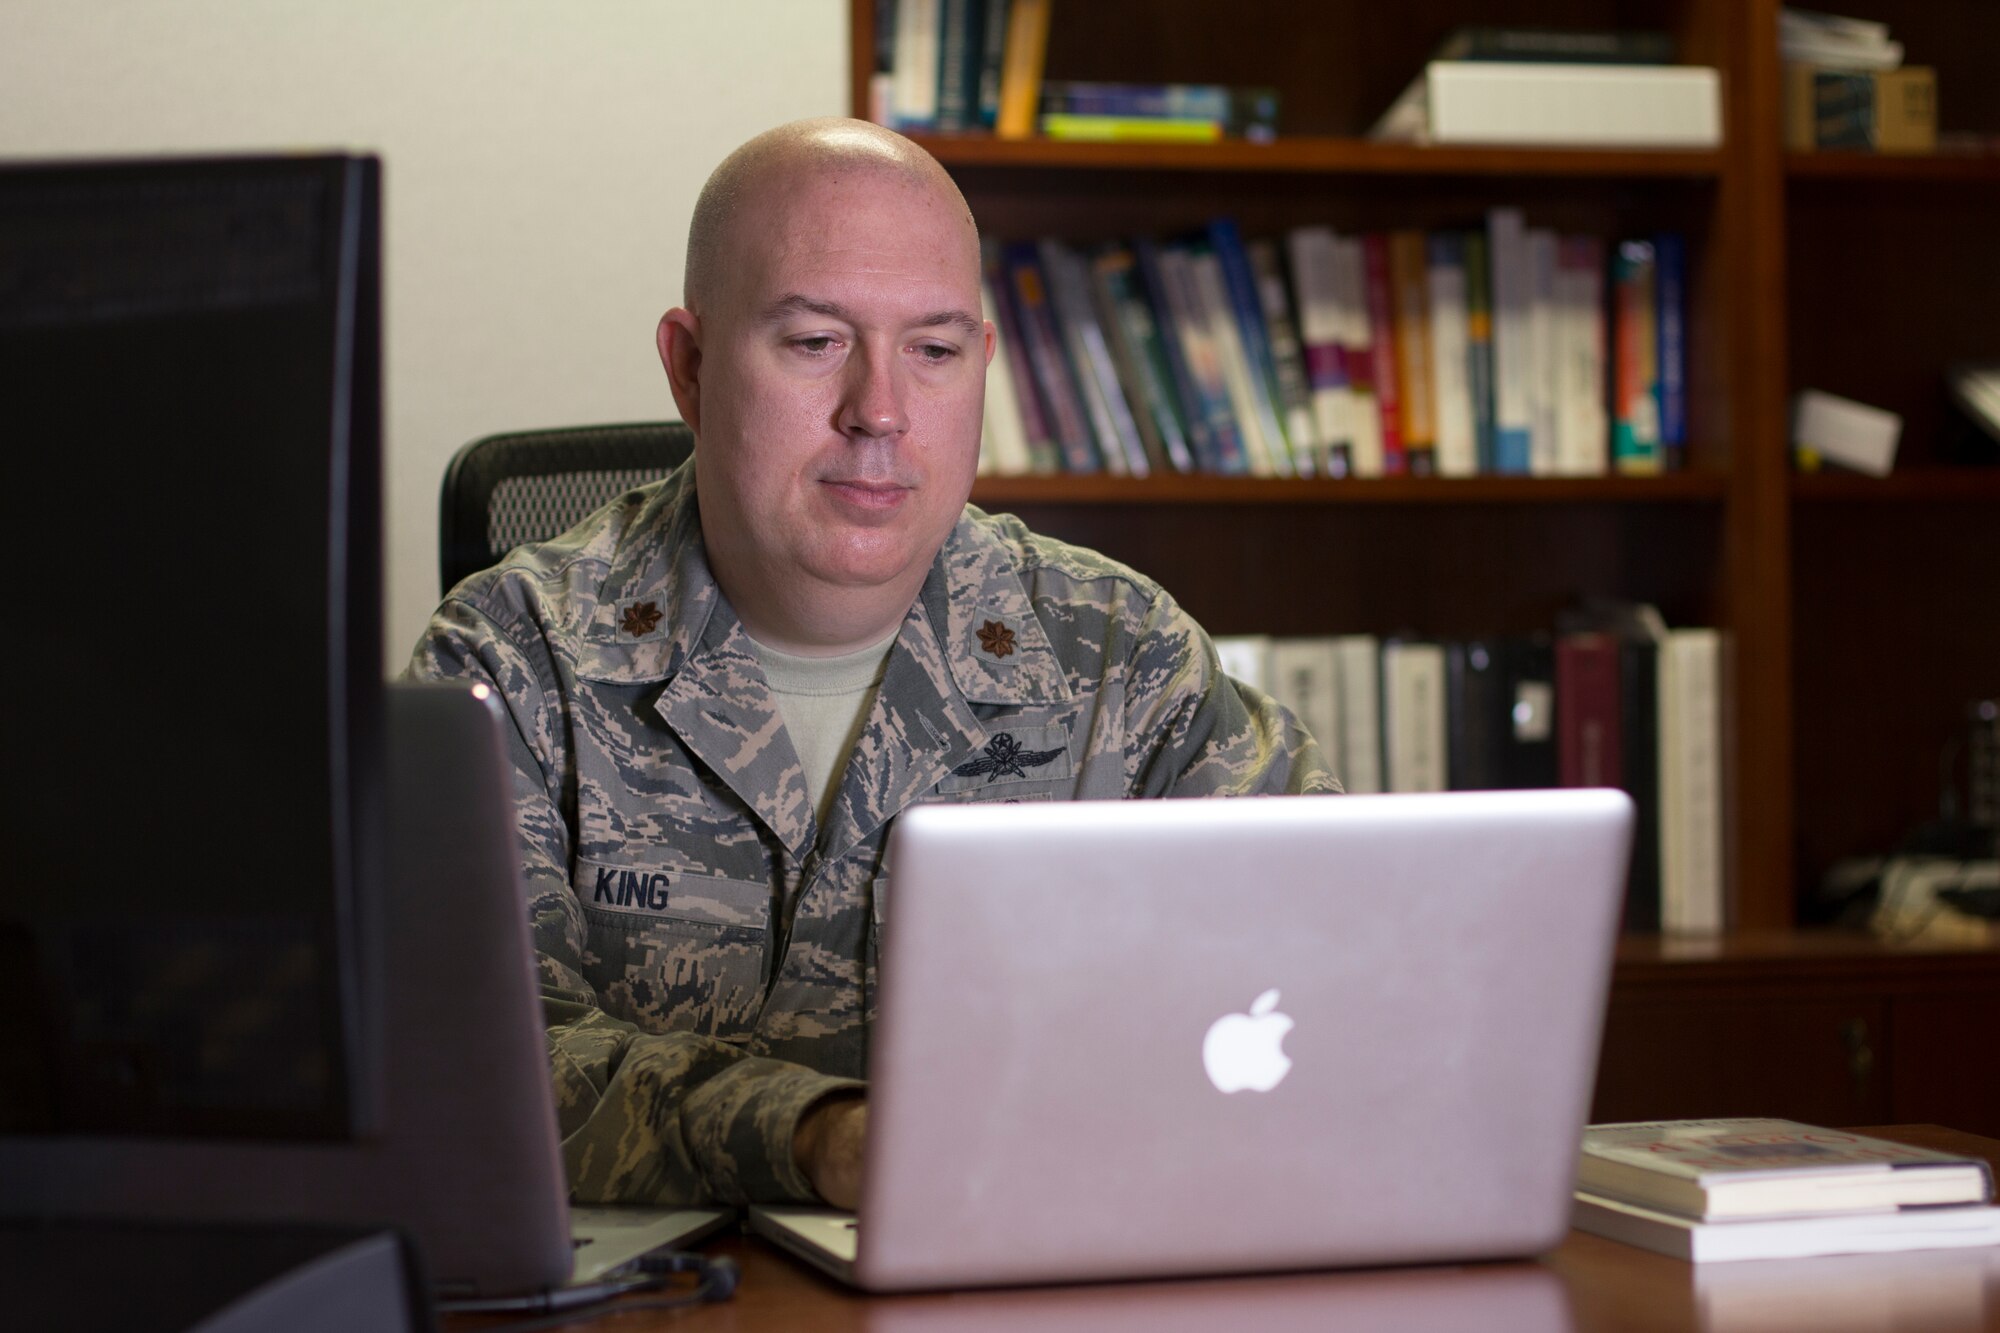 Major David King studies how to create and leverage emergent phenomena in complex systems with applications towards building and controlling adaptable robotic swarms at The Air Force Institute of Technology (AFIT). (Photos by Bruce Lambert, Ctr., Cyber Security Videographer.)